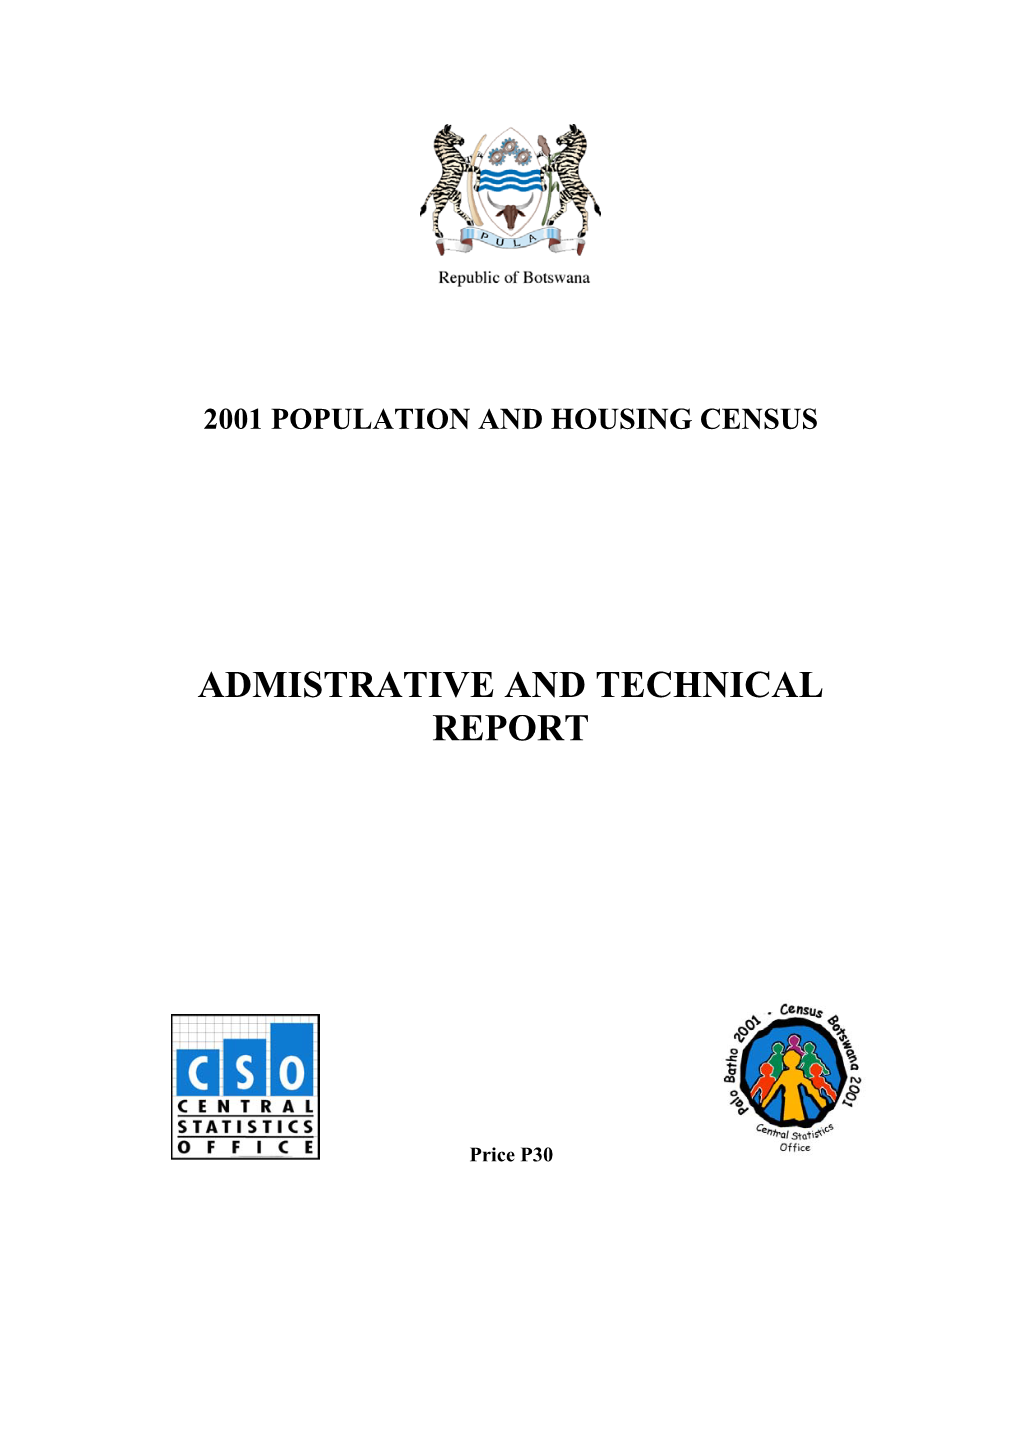 Admistrative and Technical Report